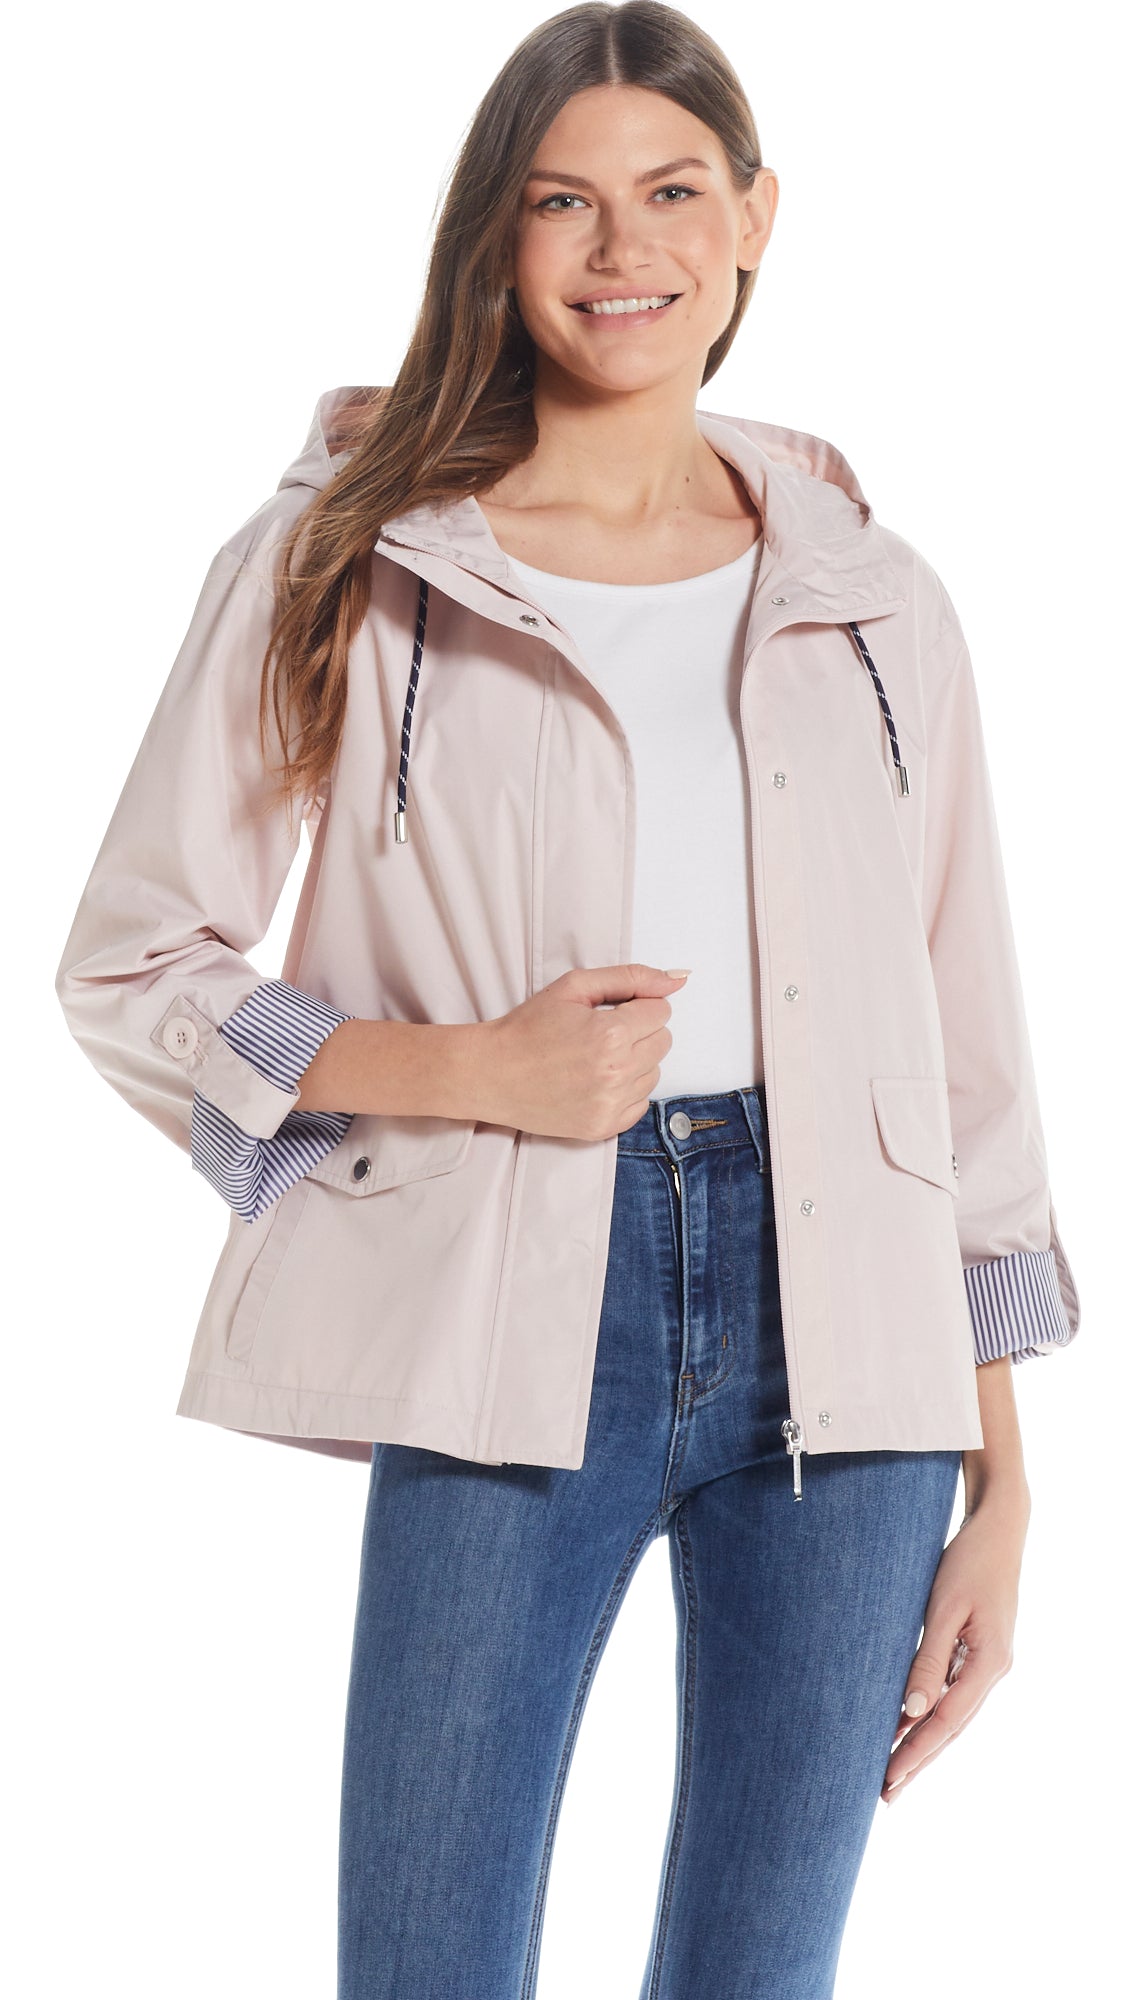 HOODED JACKET WITH TURN BACK SLEEVES